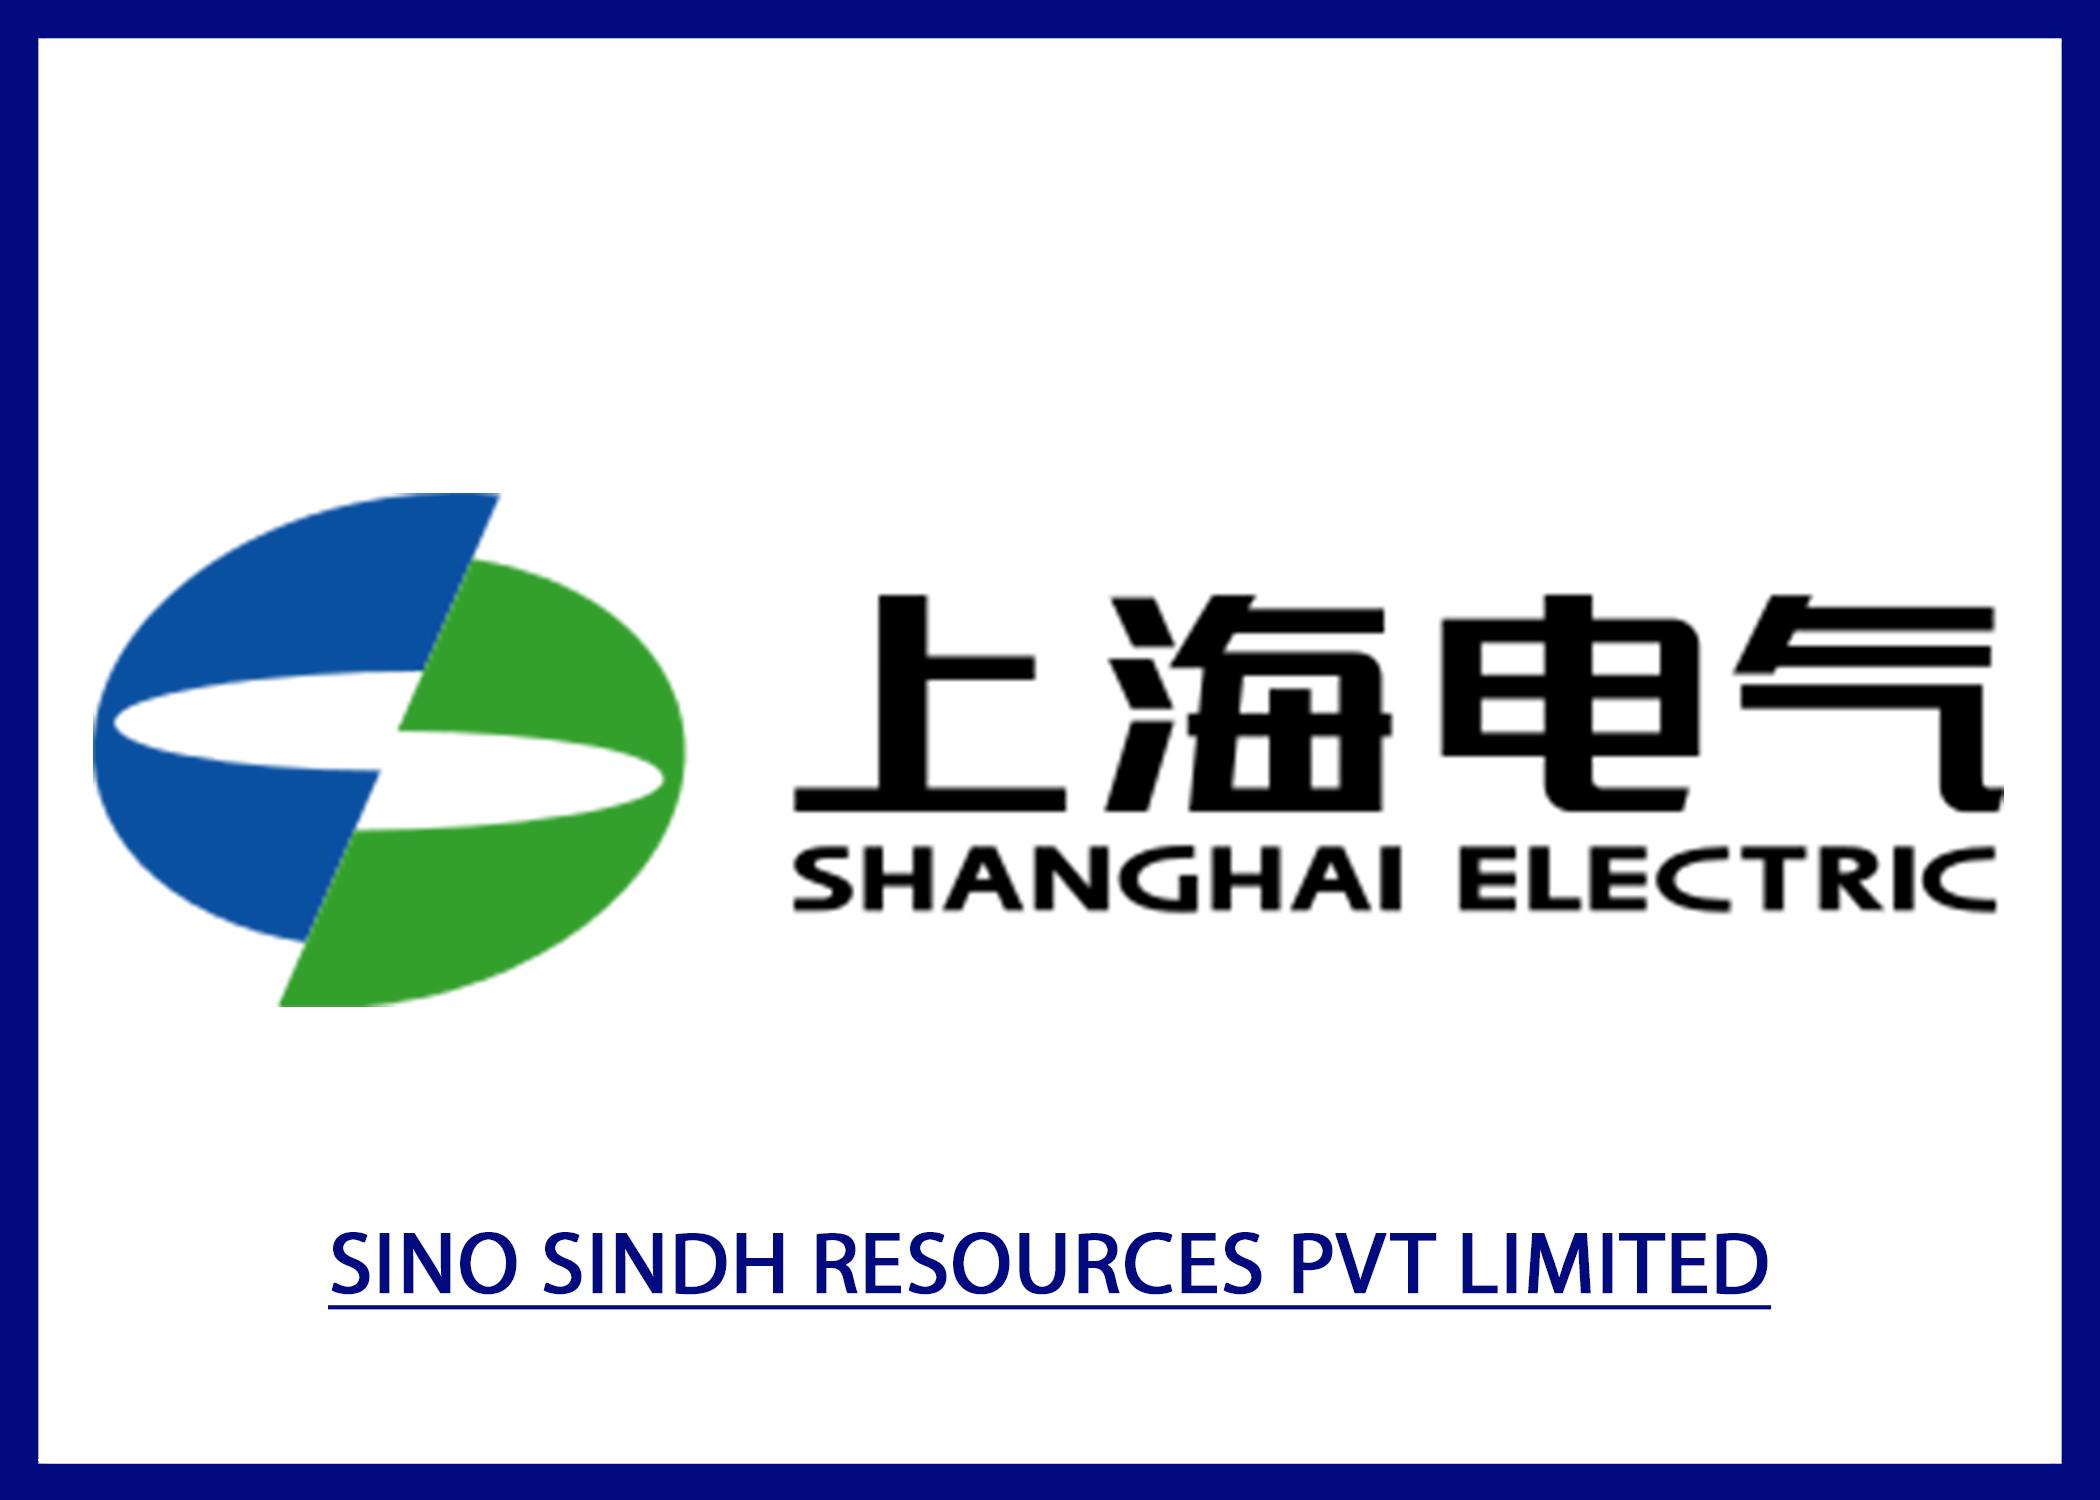 SINO SINDH RESOURCES PVT LIMITED